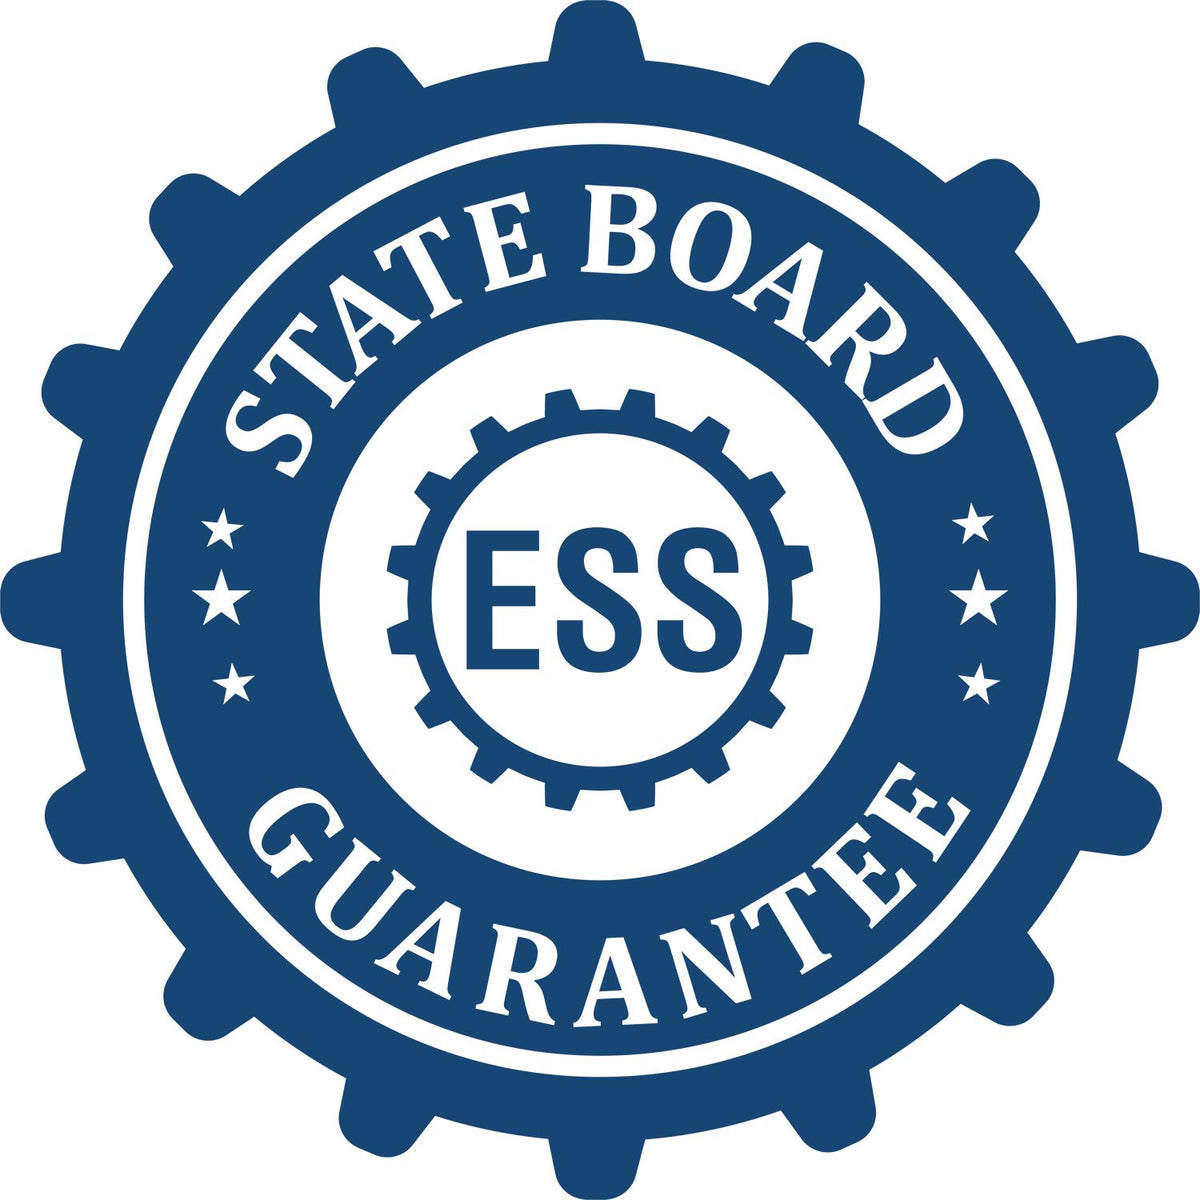 An emblem in a gear shape illustrating a state board guarantee for the Hybrid Florida Land Surveyor Seal